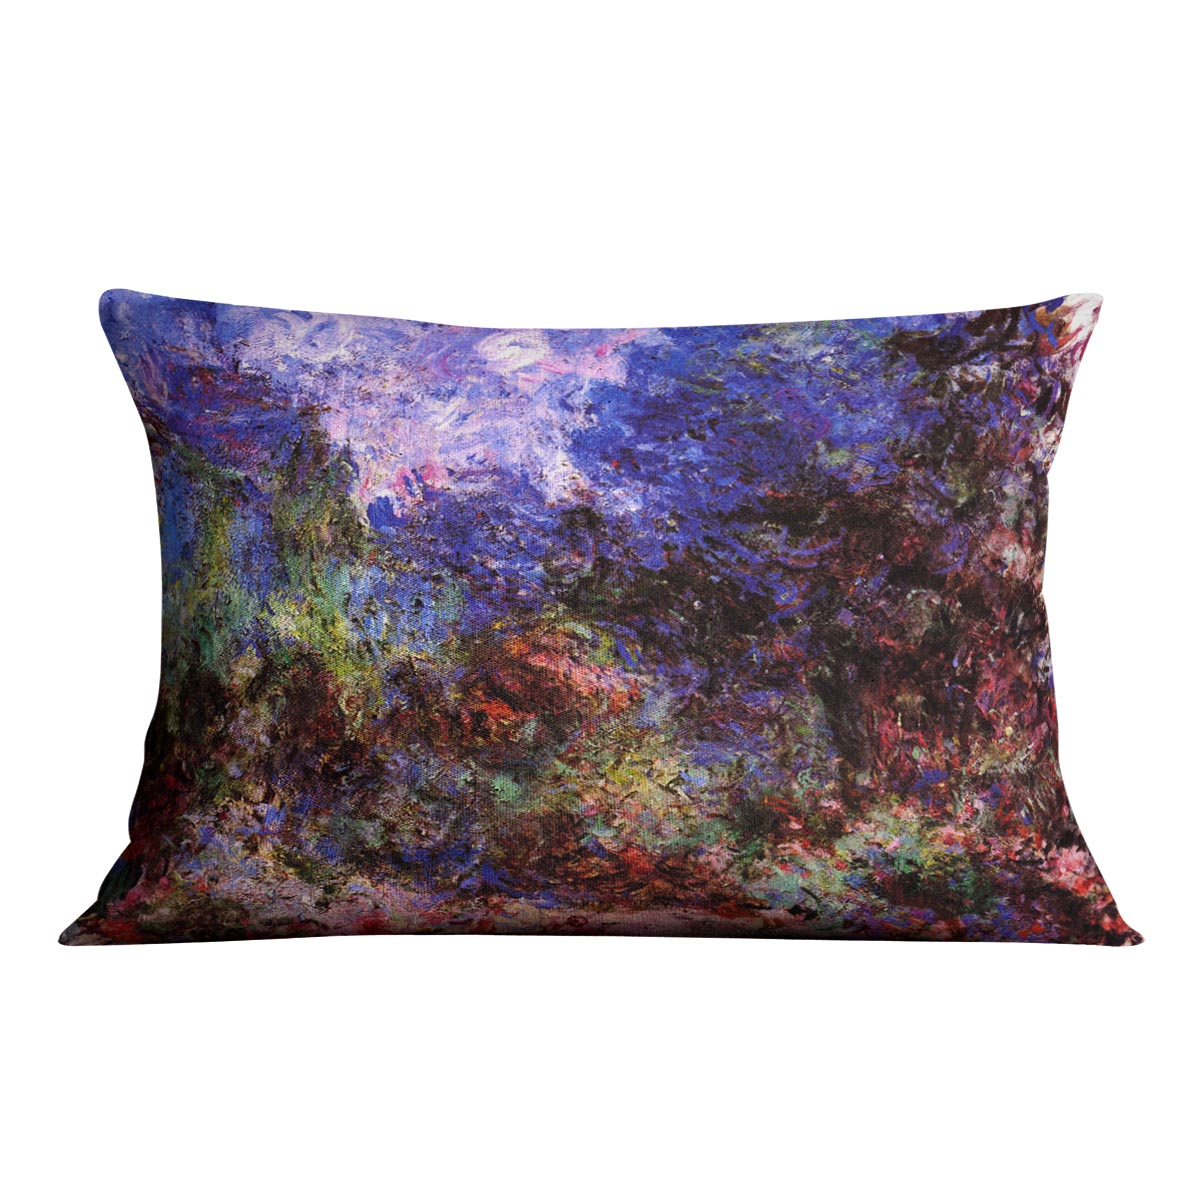 Roses at the garden side of Monets house in Giverny by Monet Cushion